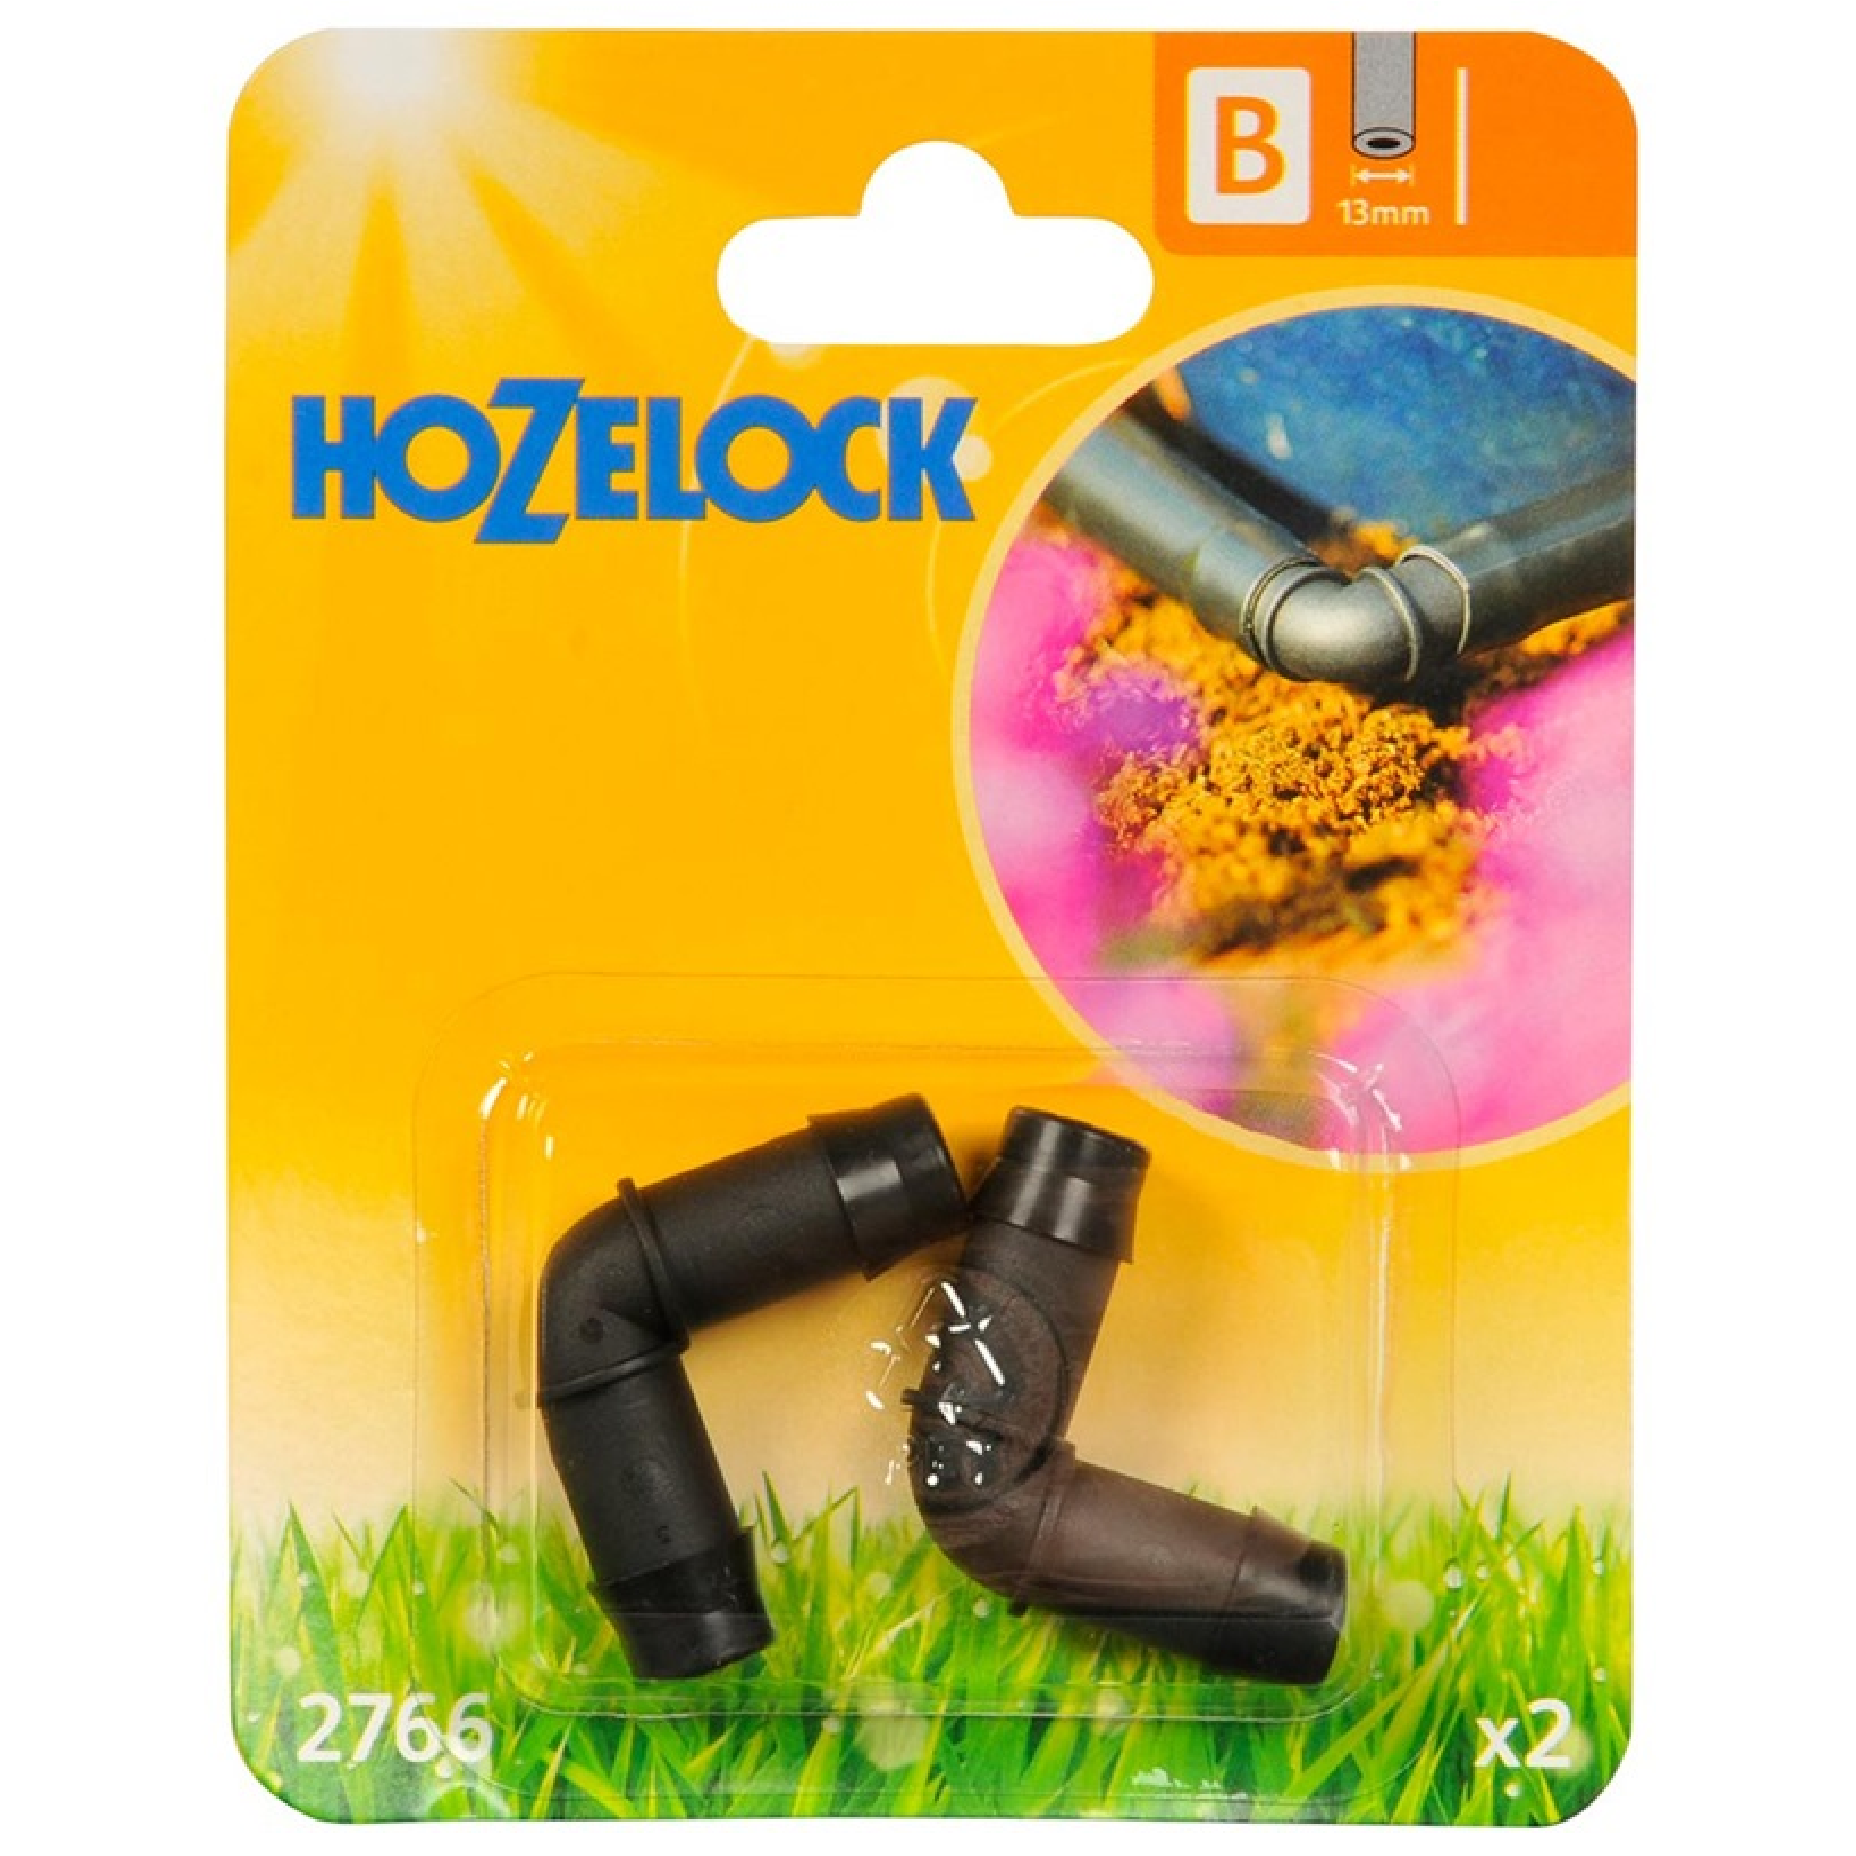 Hozelock ELBOW Connector For 13MM HARD HOSE 2766 2PC/Pack